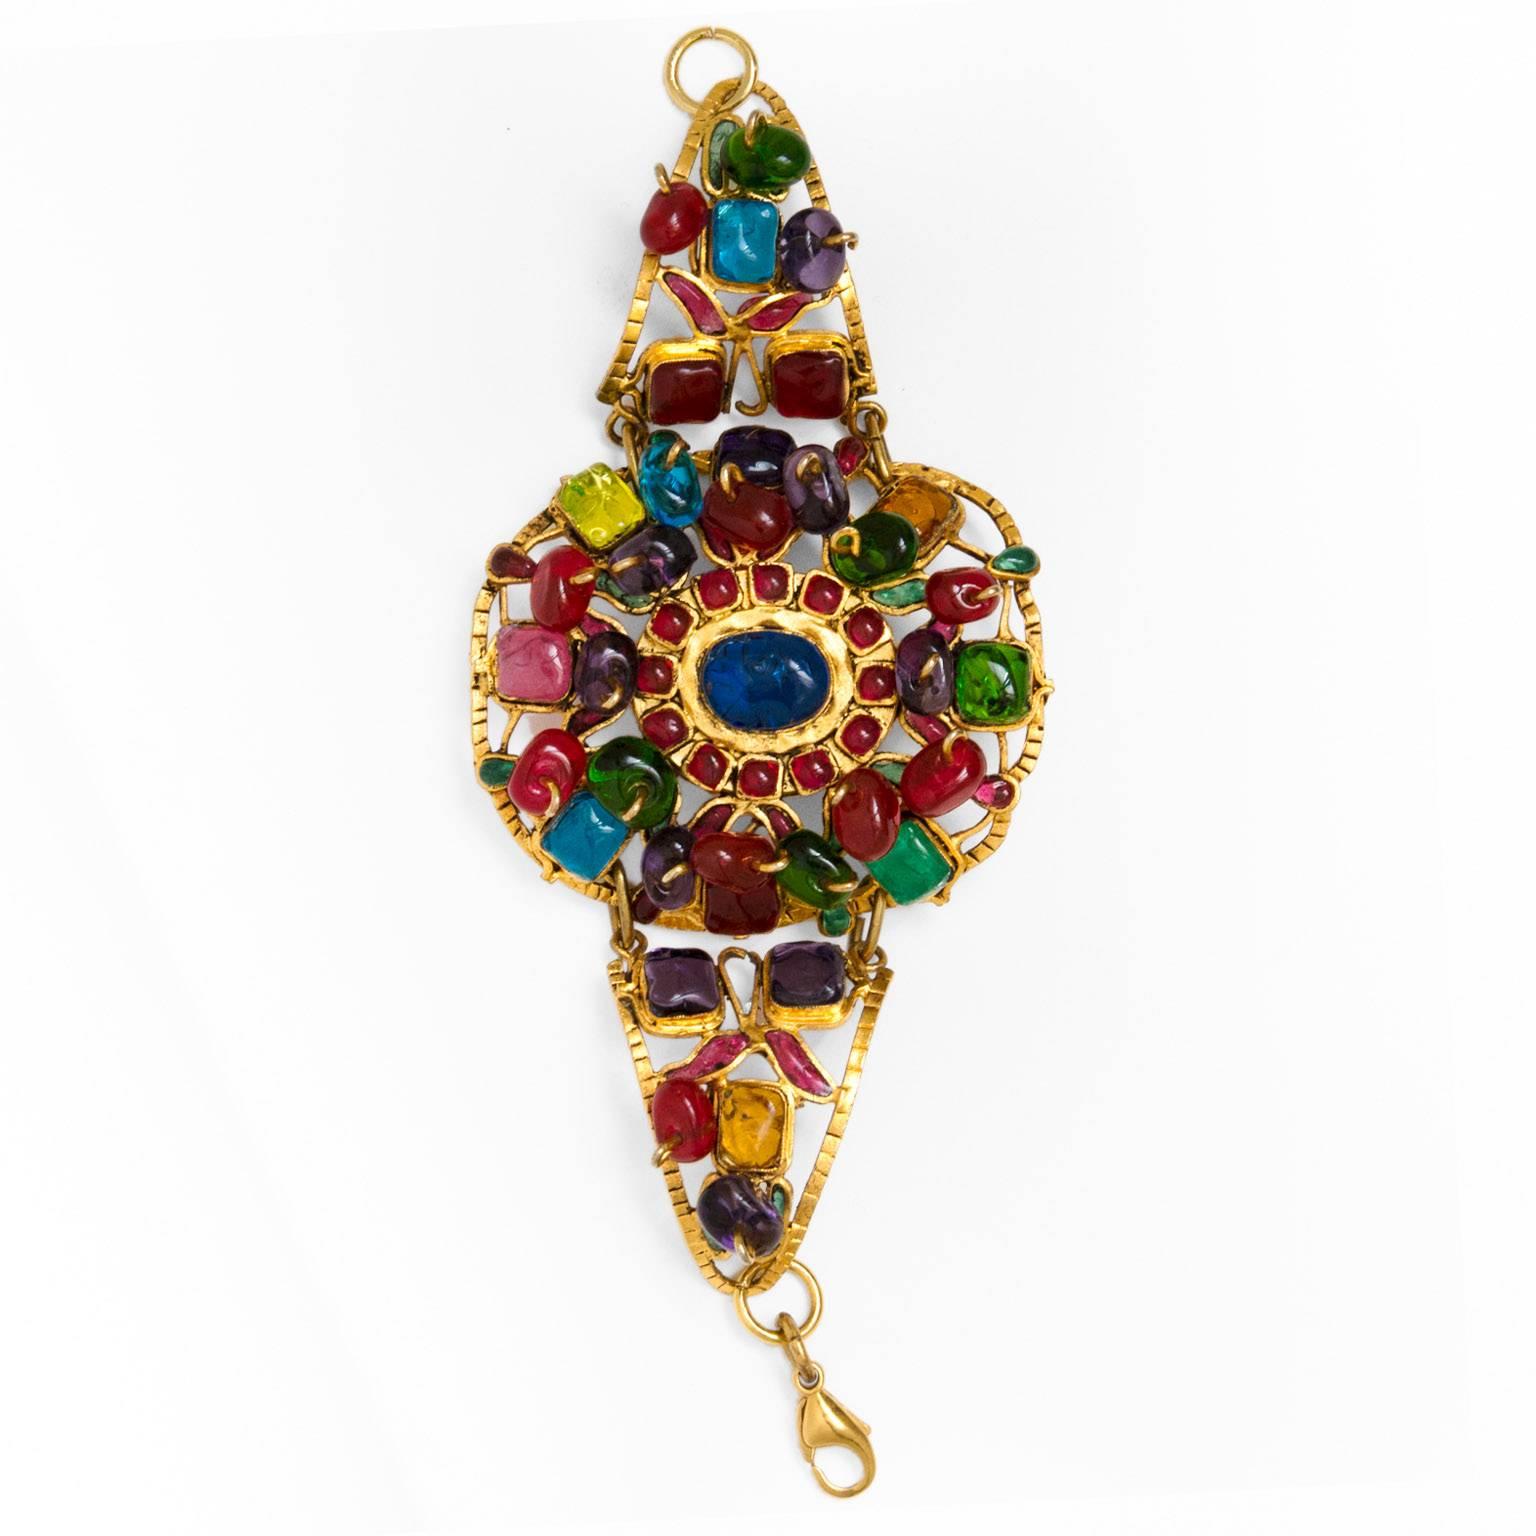 2003 Chanel Divine Multicolor Bracelet :                                                      Extraordinary bracelet gold metal composed of a sublime oval medallion decorated with stones in glass : green purple red yellow rose .
This bracelet